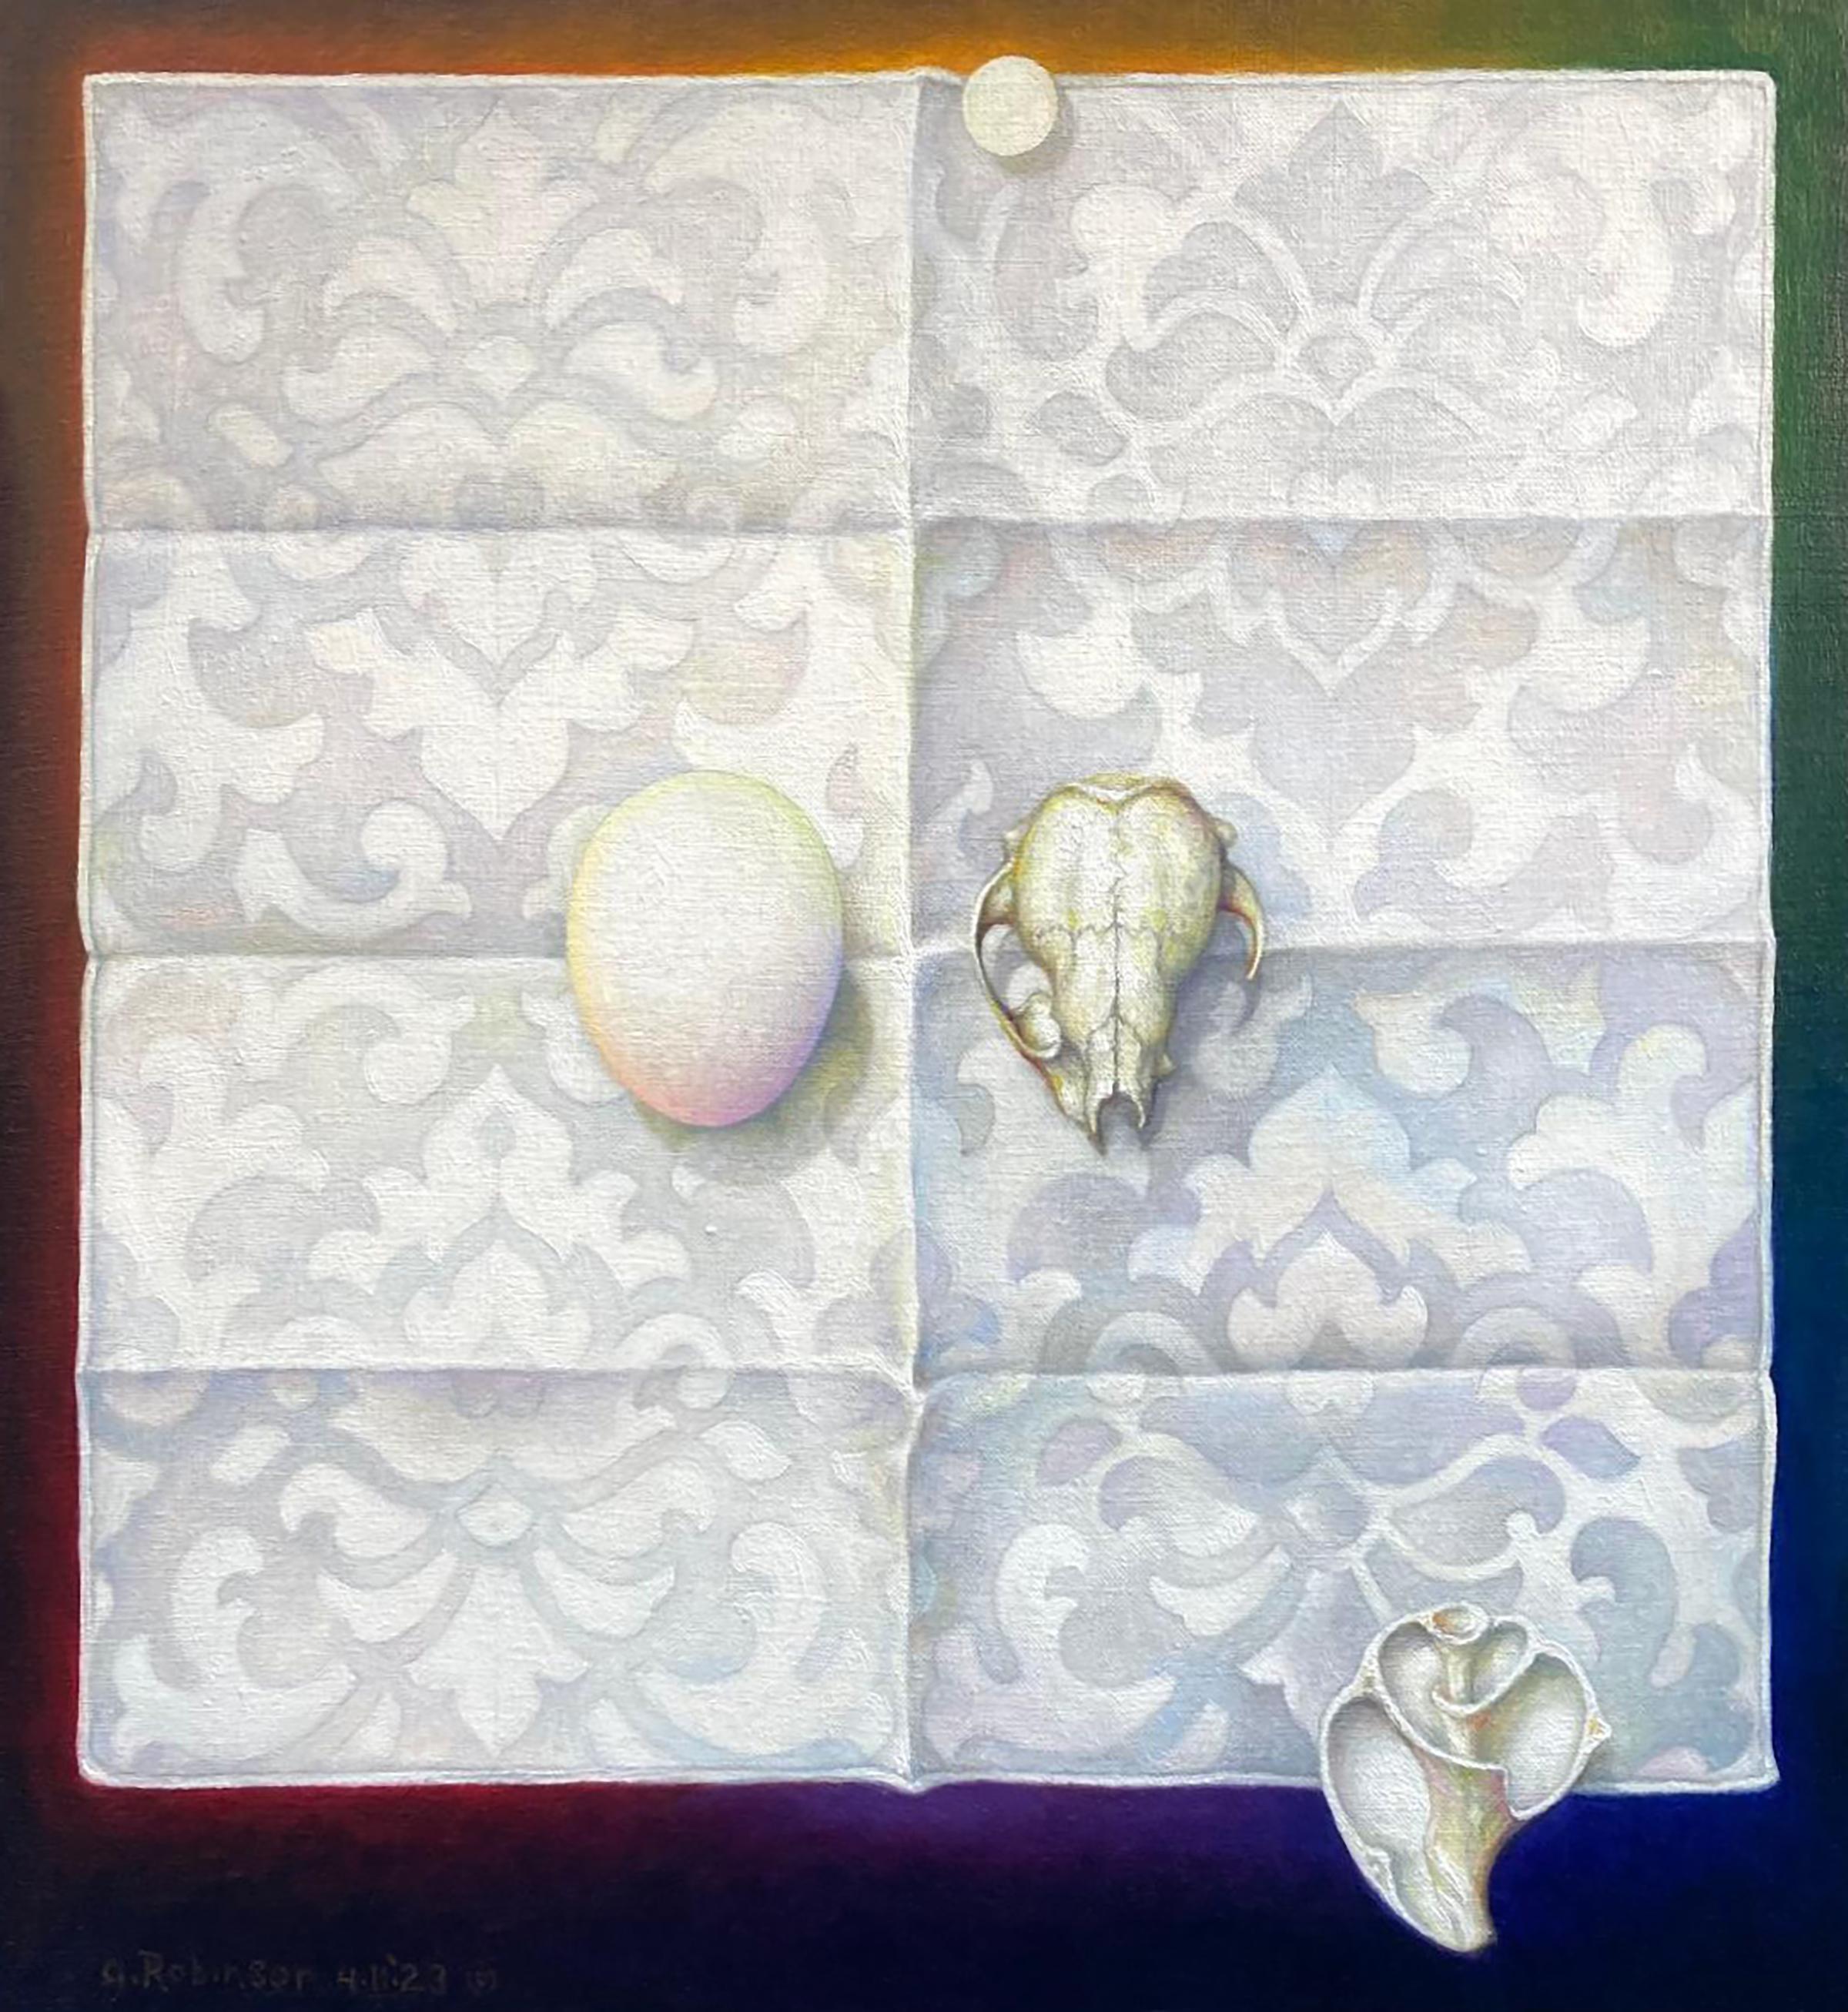 "Small Study in White" - surrealist still life, lace, skull, patterns, shell